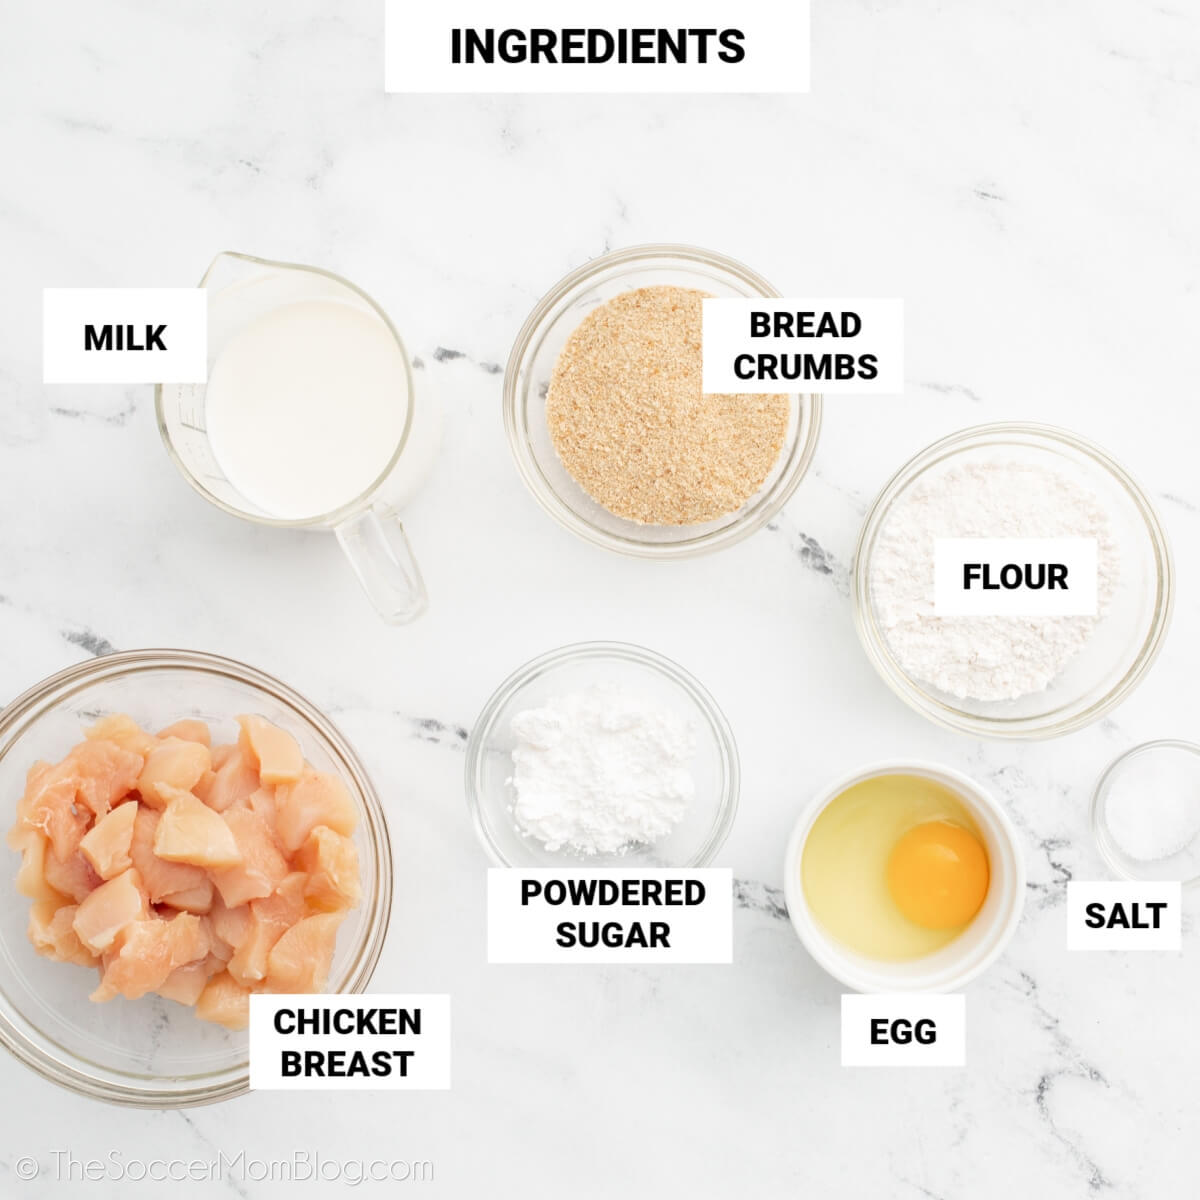 ingredients to make homemade Chick-Fil-A chicken nuggets, with text labels